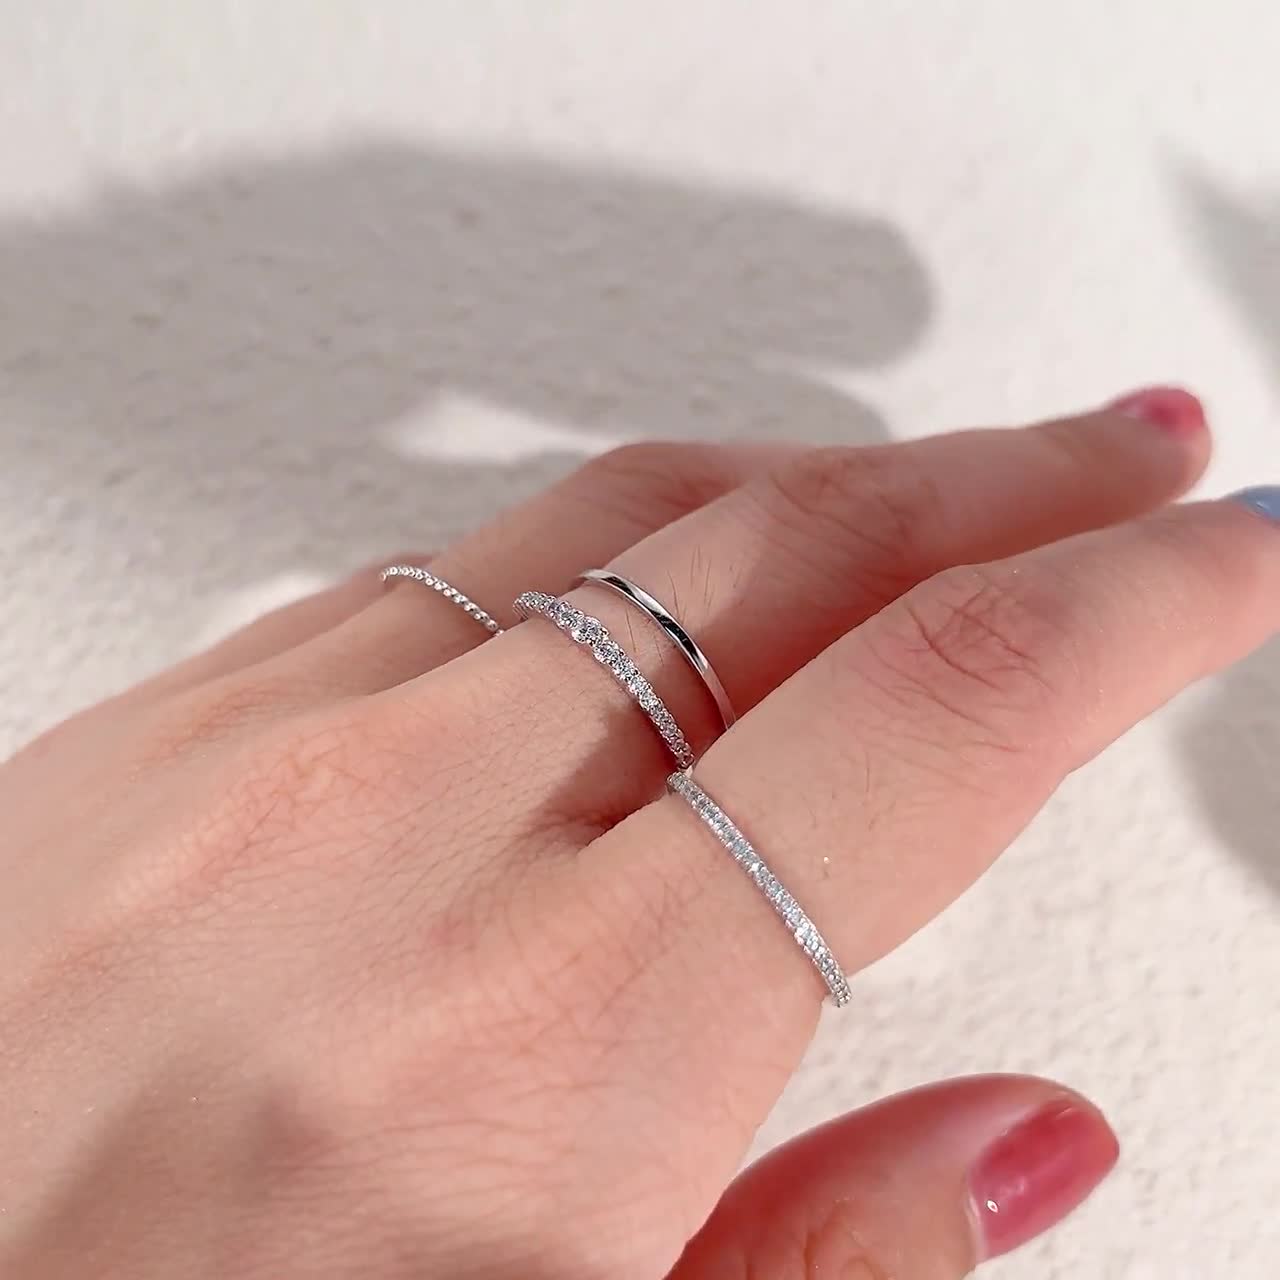 Ultra Minimalist Set Ring Silver Gold Sterling of Mixed Thin Set Rings Dainty 925 of Diamond - Stacking 4, Thin Delicate Simple Etsy Ring Stackable